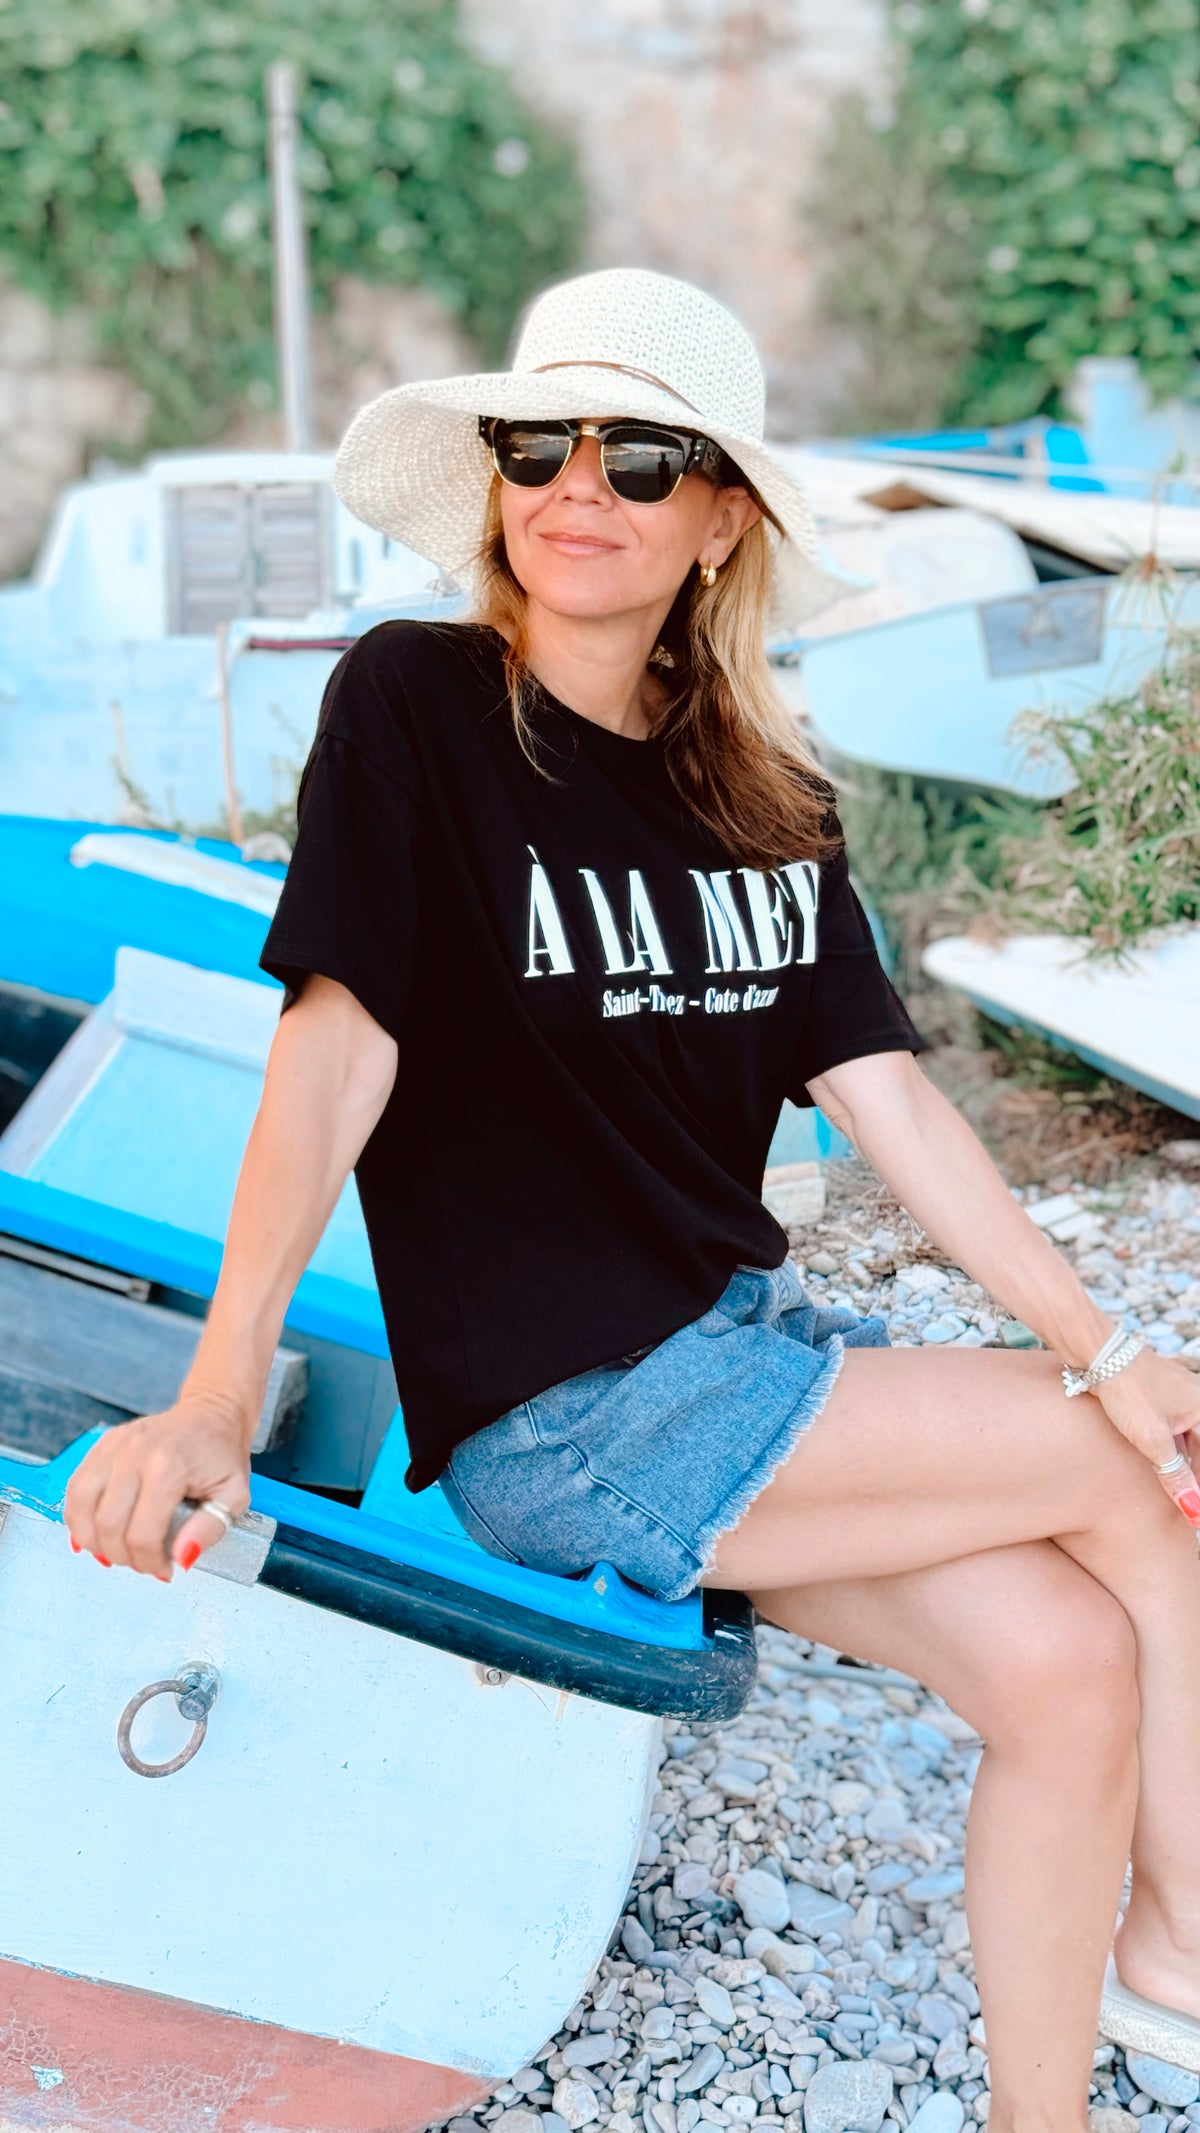 A La Mer Italian Top - Black-110 Short Sleeve Tops-Italianissimo-Coastal Bloom Boutique, find the trendiest versions of the popular styles and looks Located in Indialantic, FL